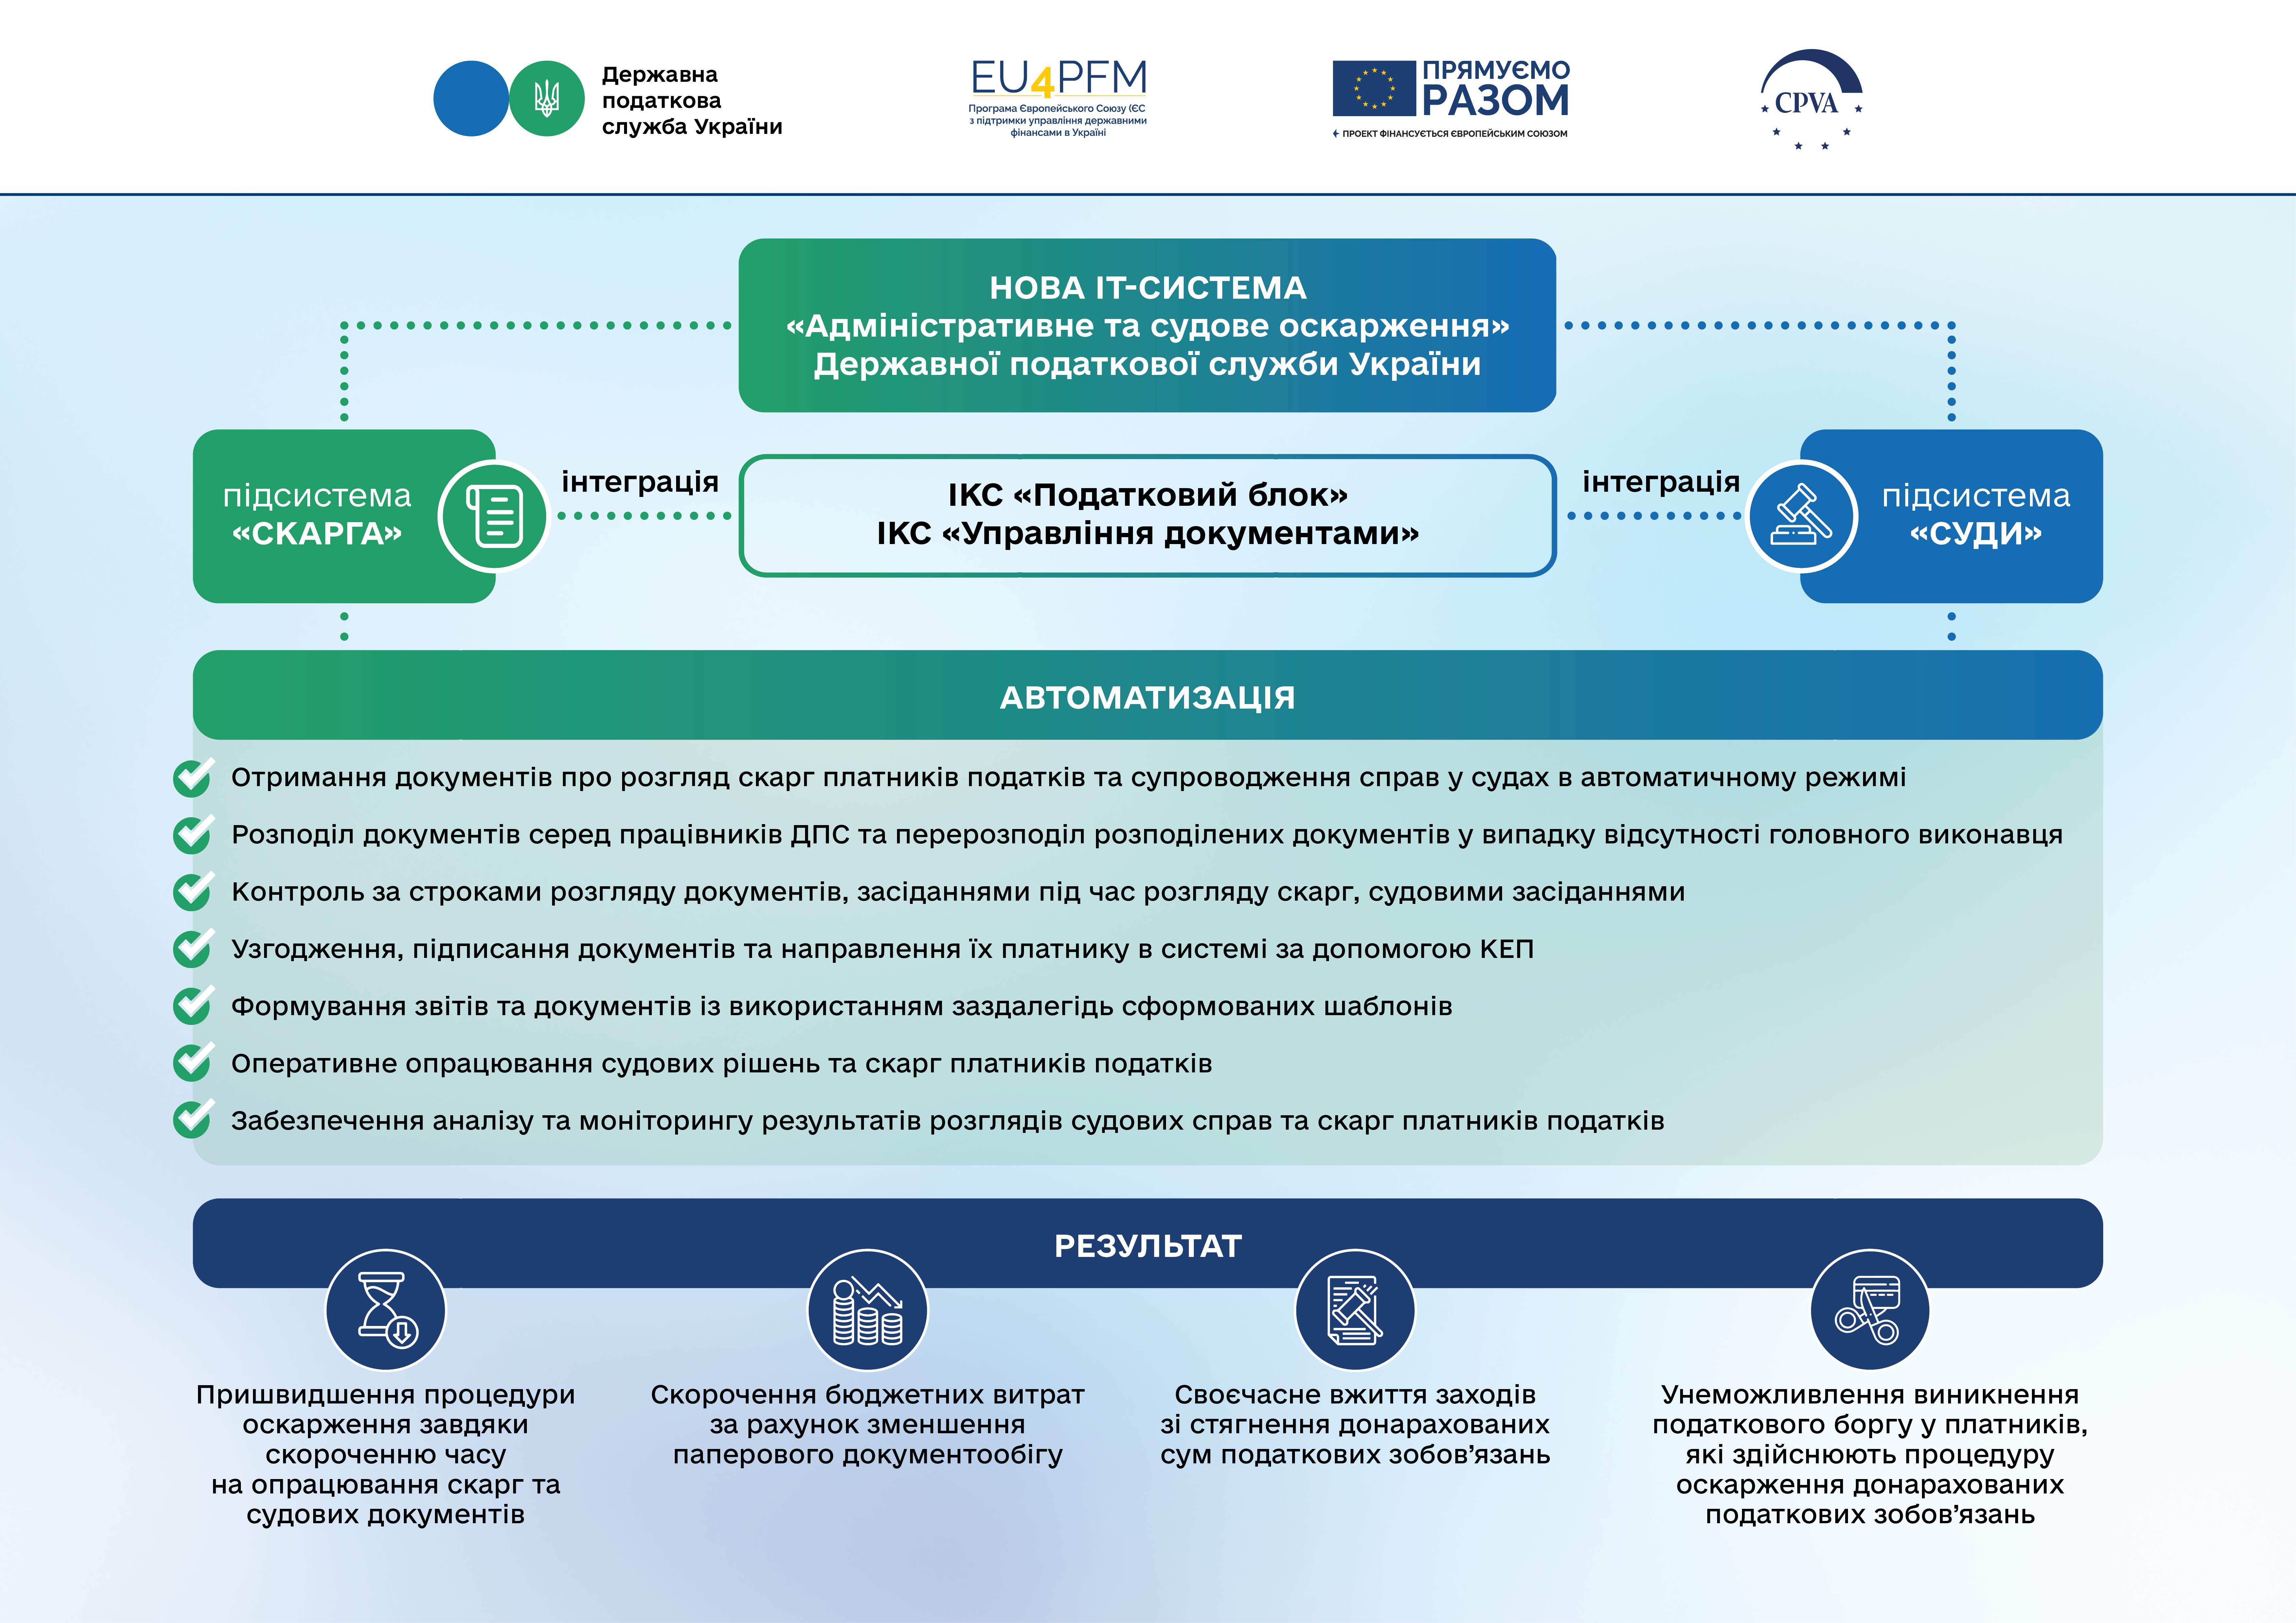 Infographic: New IT System for the Administration of Tax Disputes